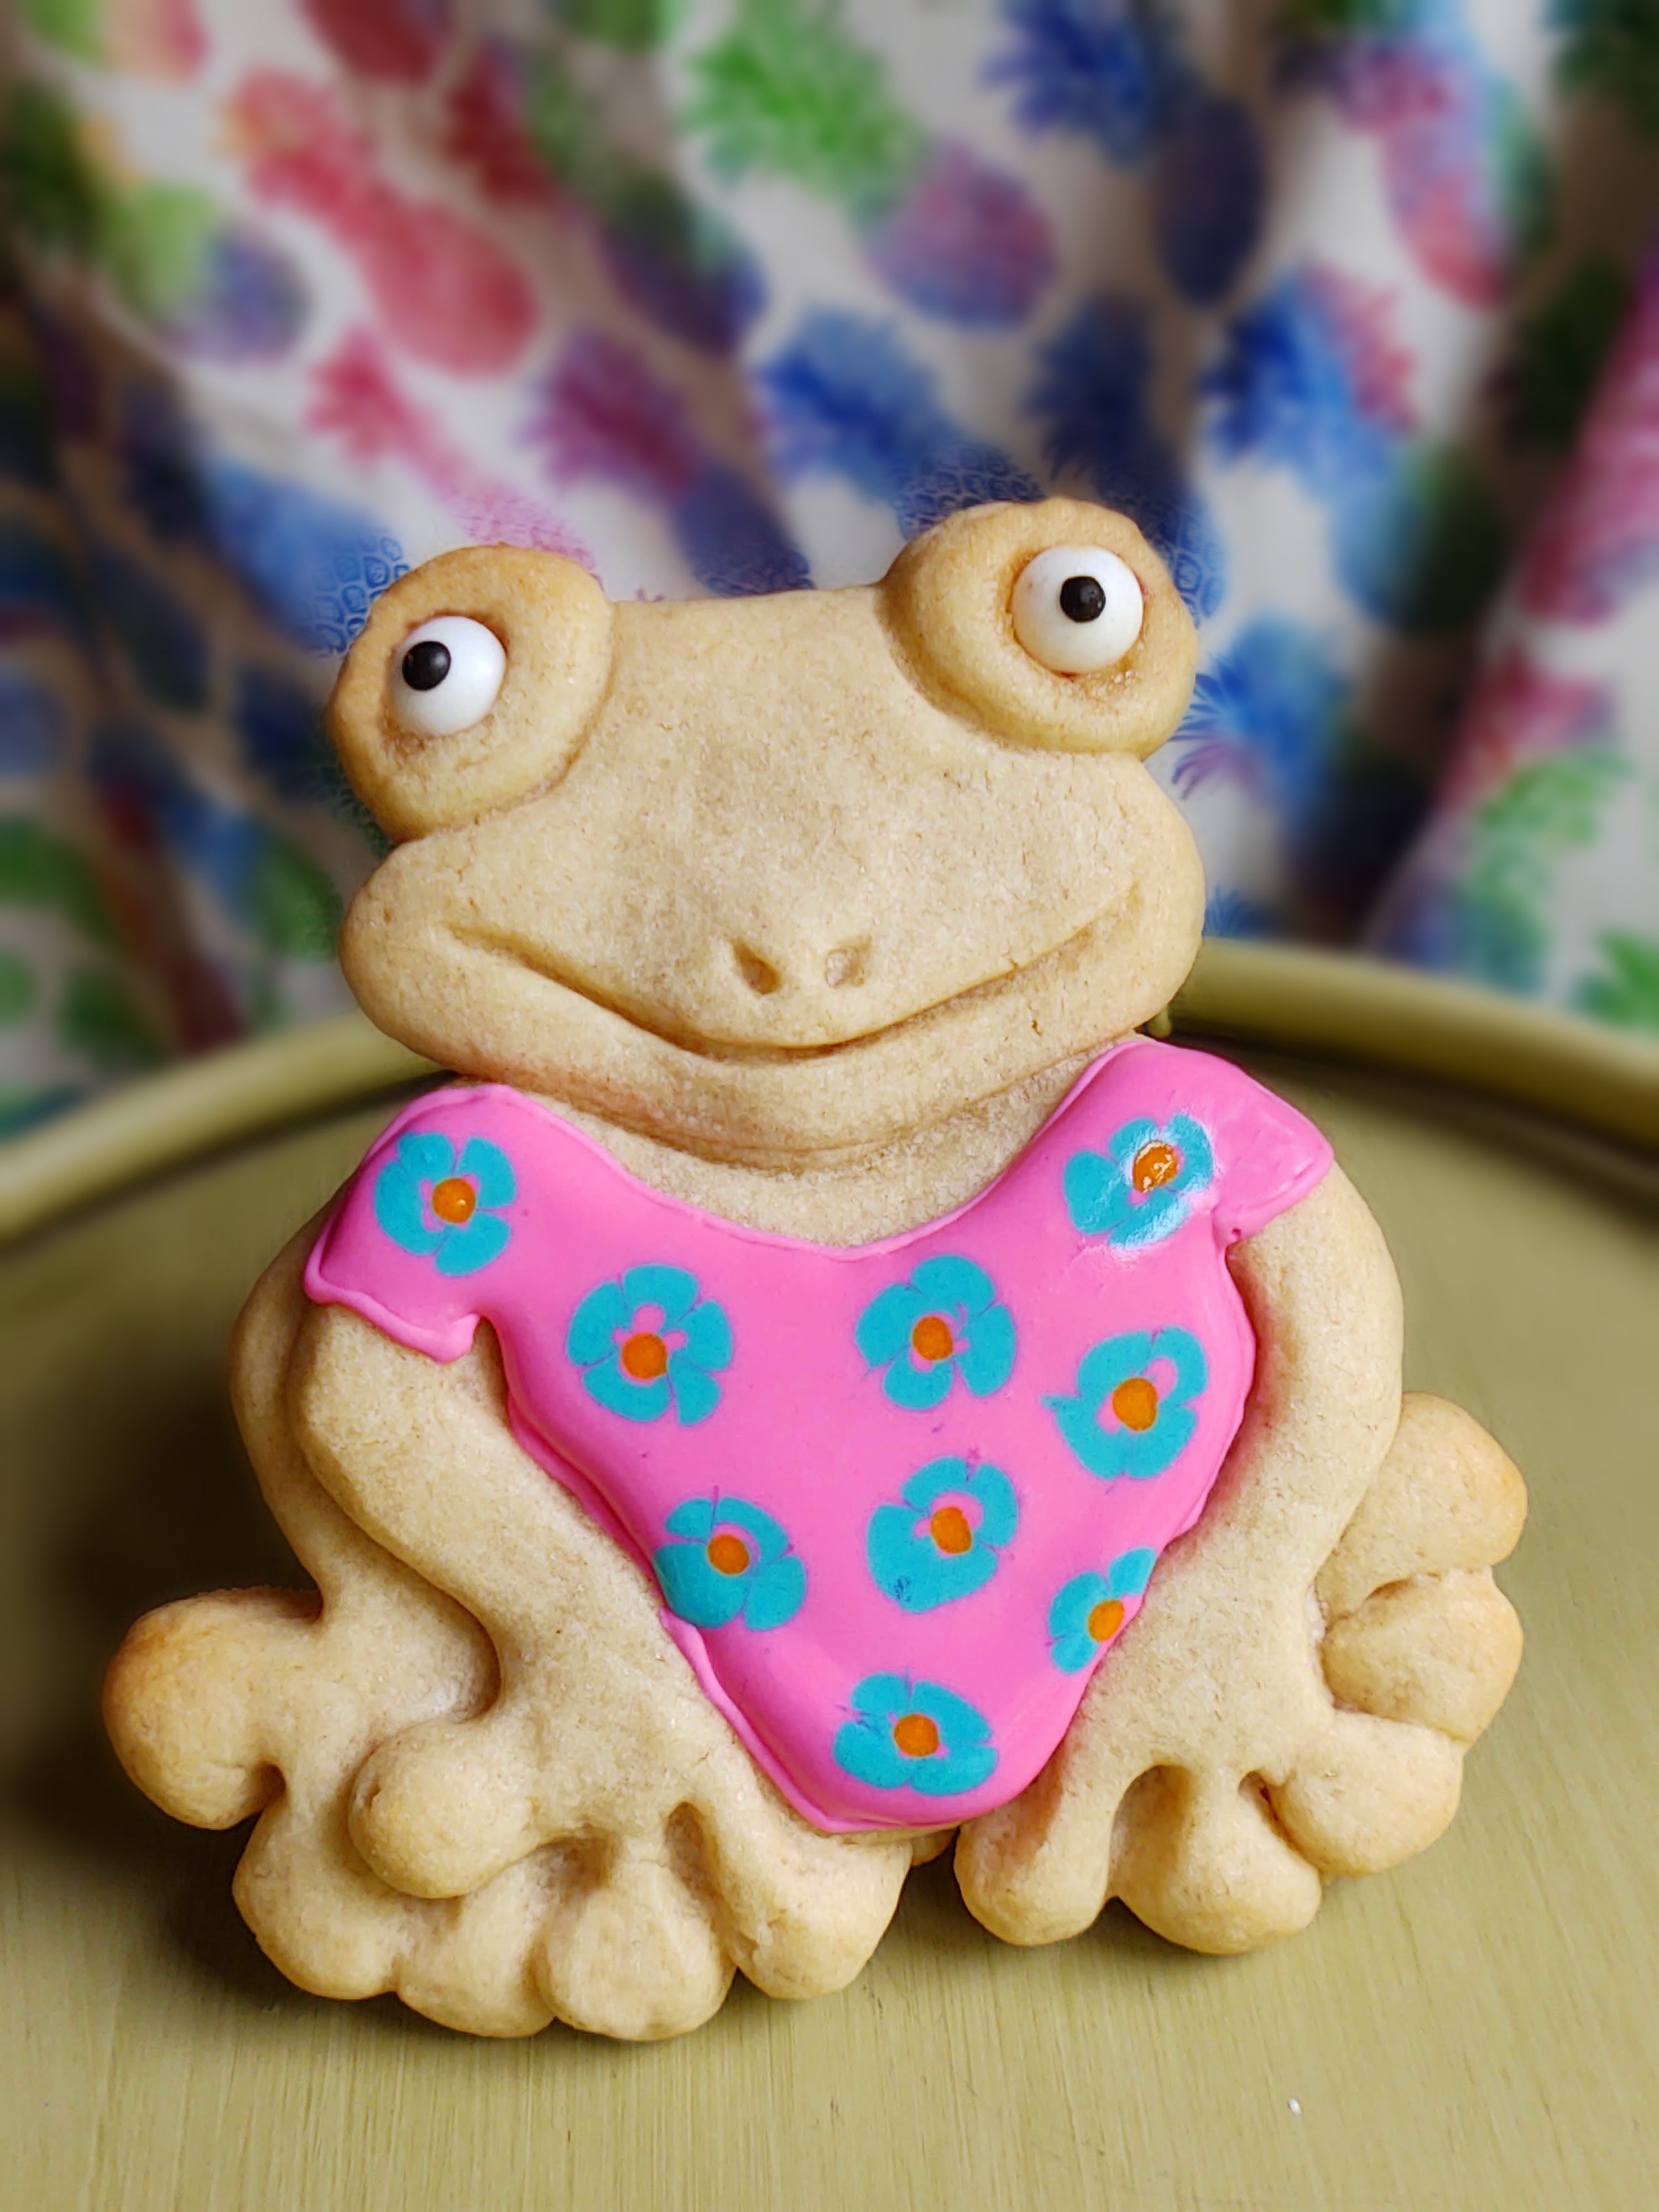 Frog Silicone Cookie Mold – Artesão Cookie Molds